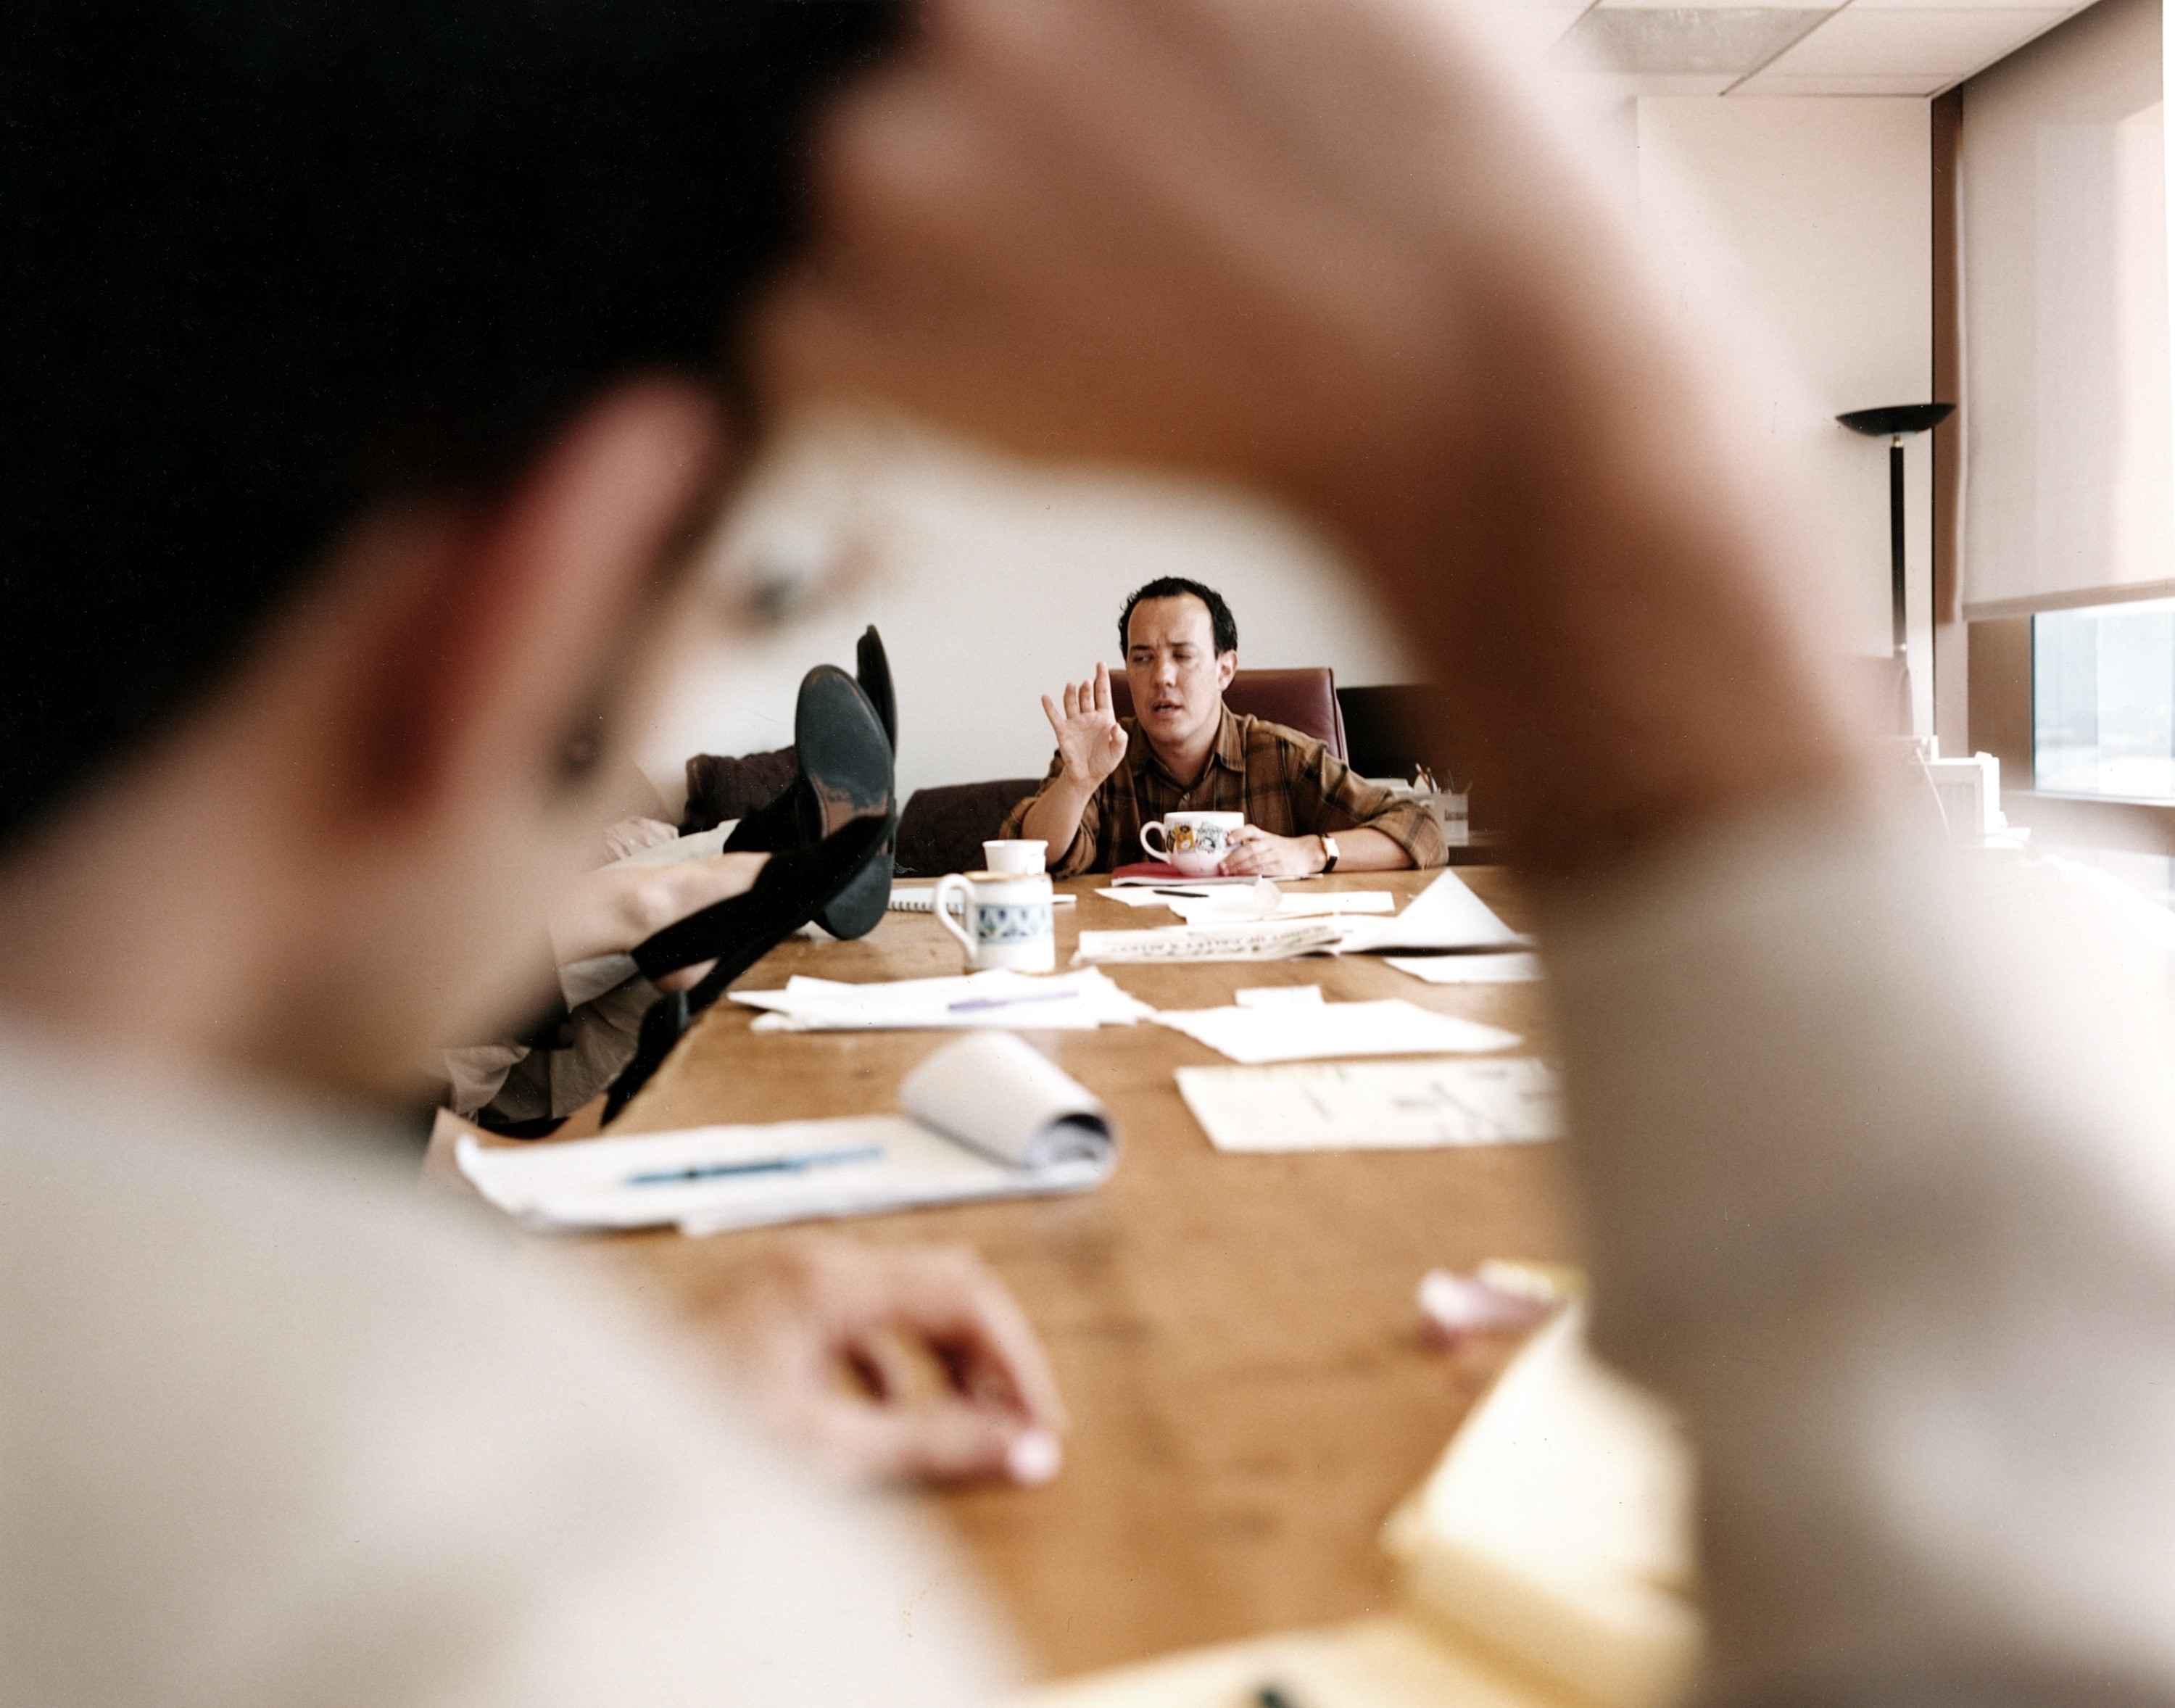 A man sits at a large, cluttered meeting table, engaging in a discussion. Two other people&#x27;s blurred figures are visible in the foreground